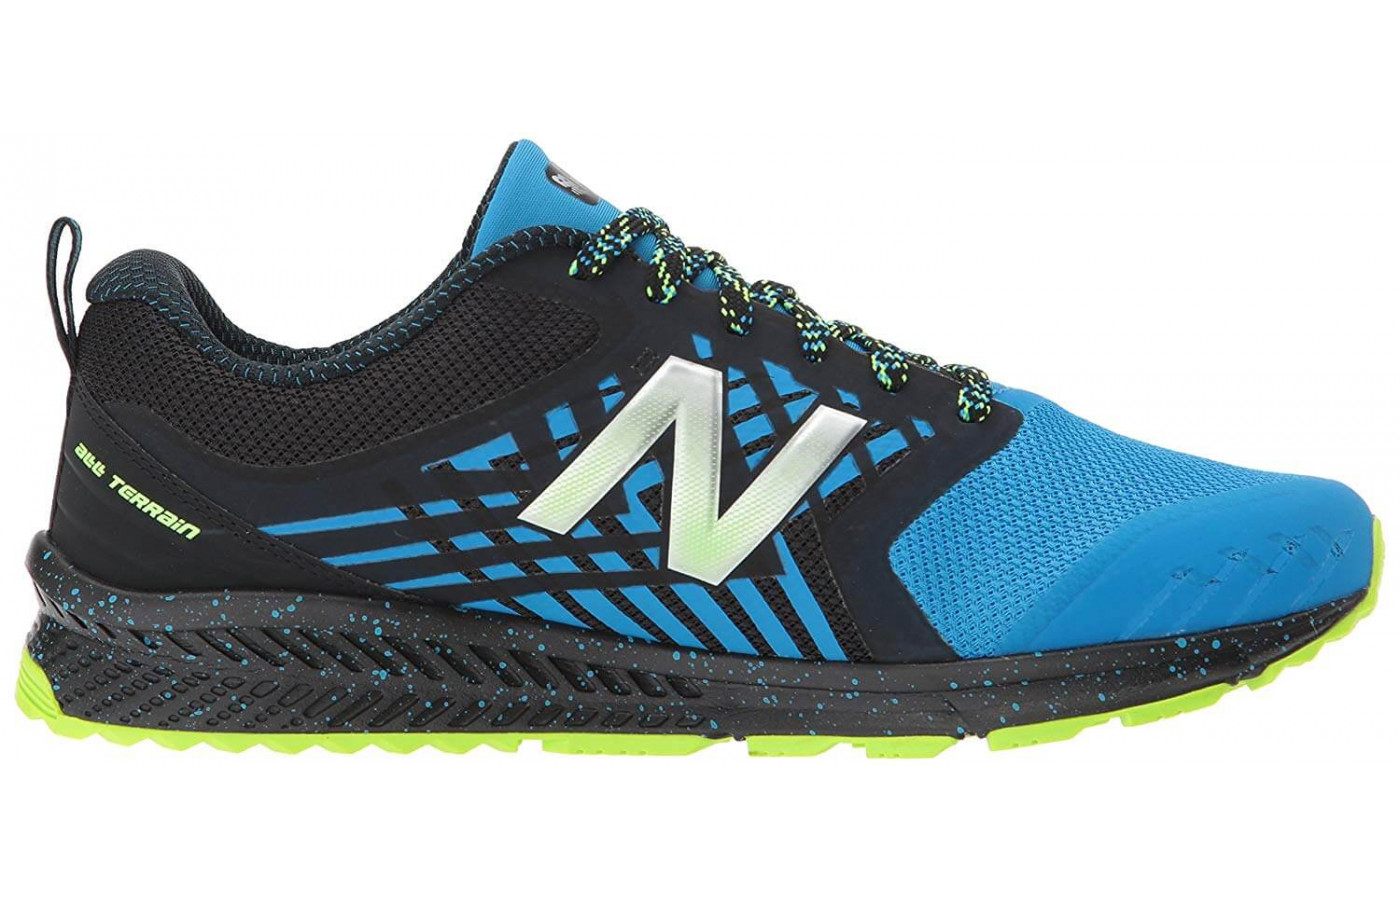 New Balance Fuelcore Nitrel Lateral